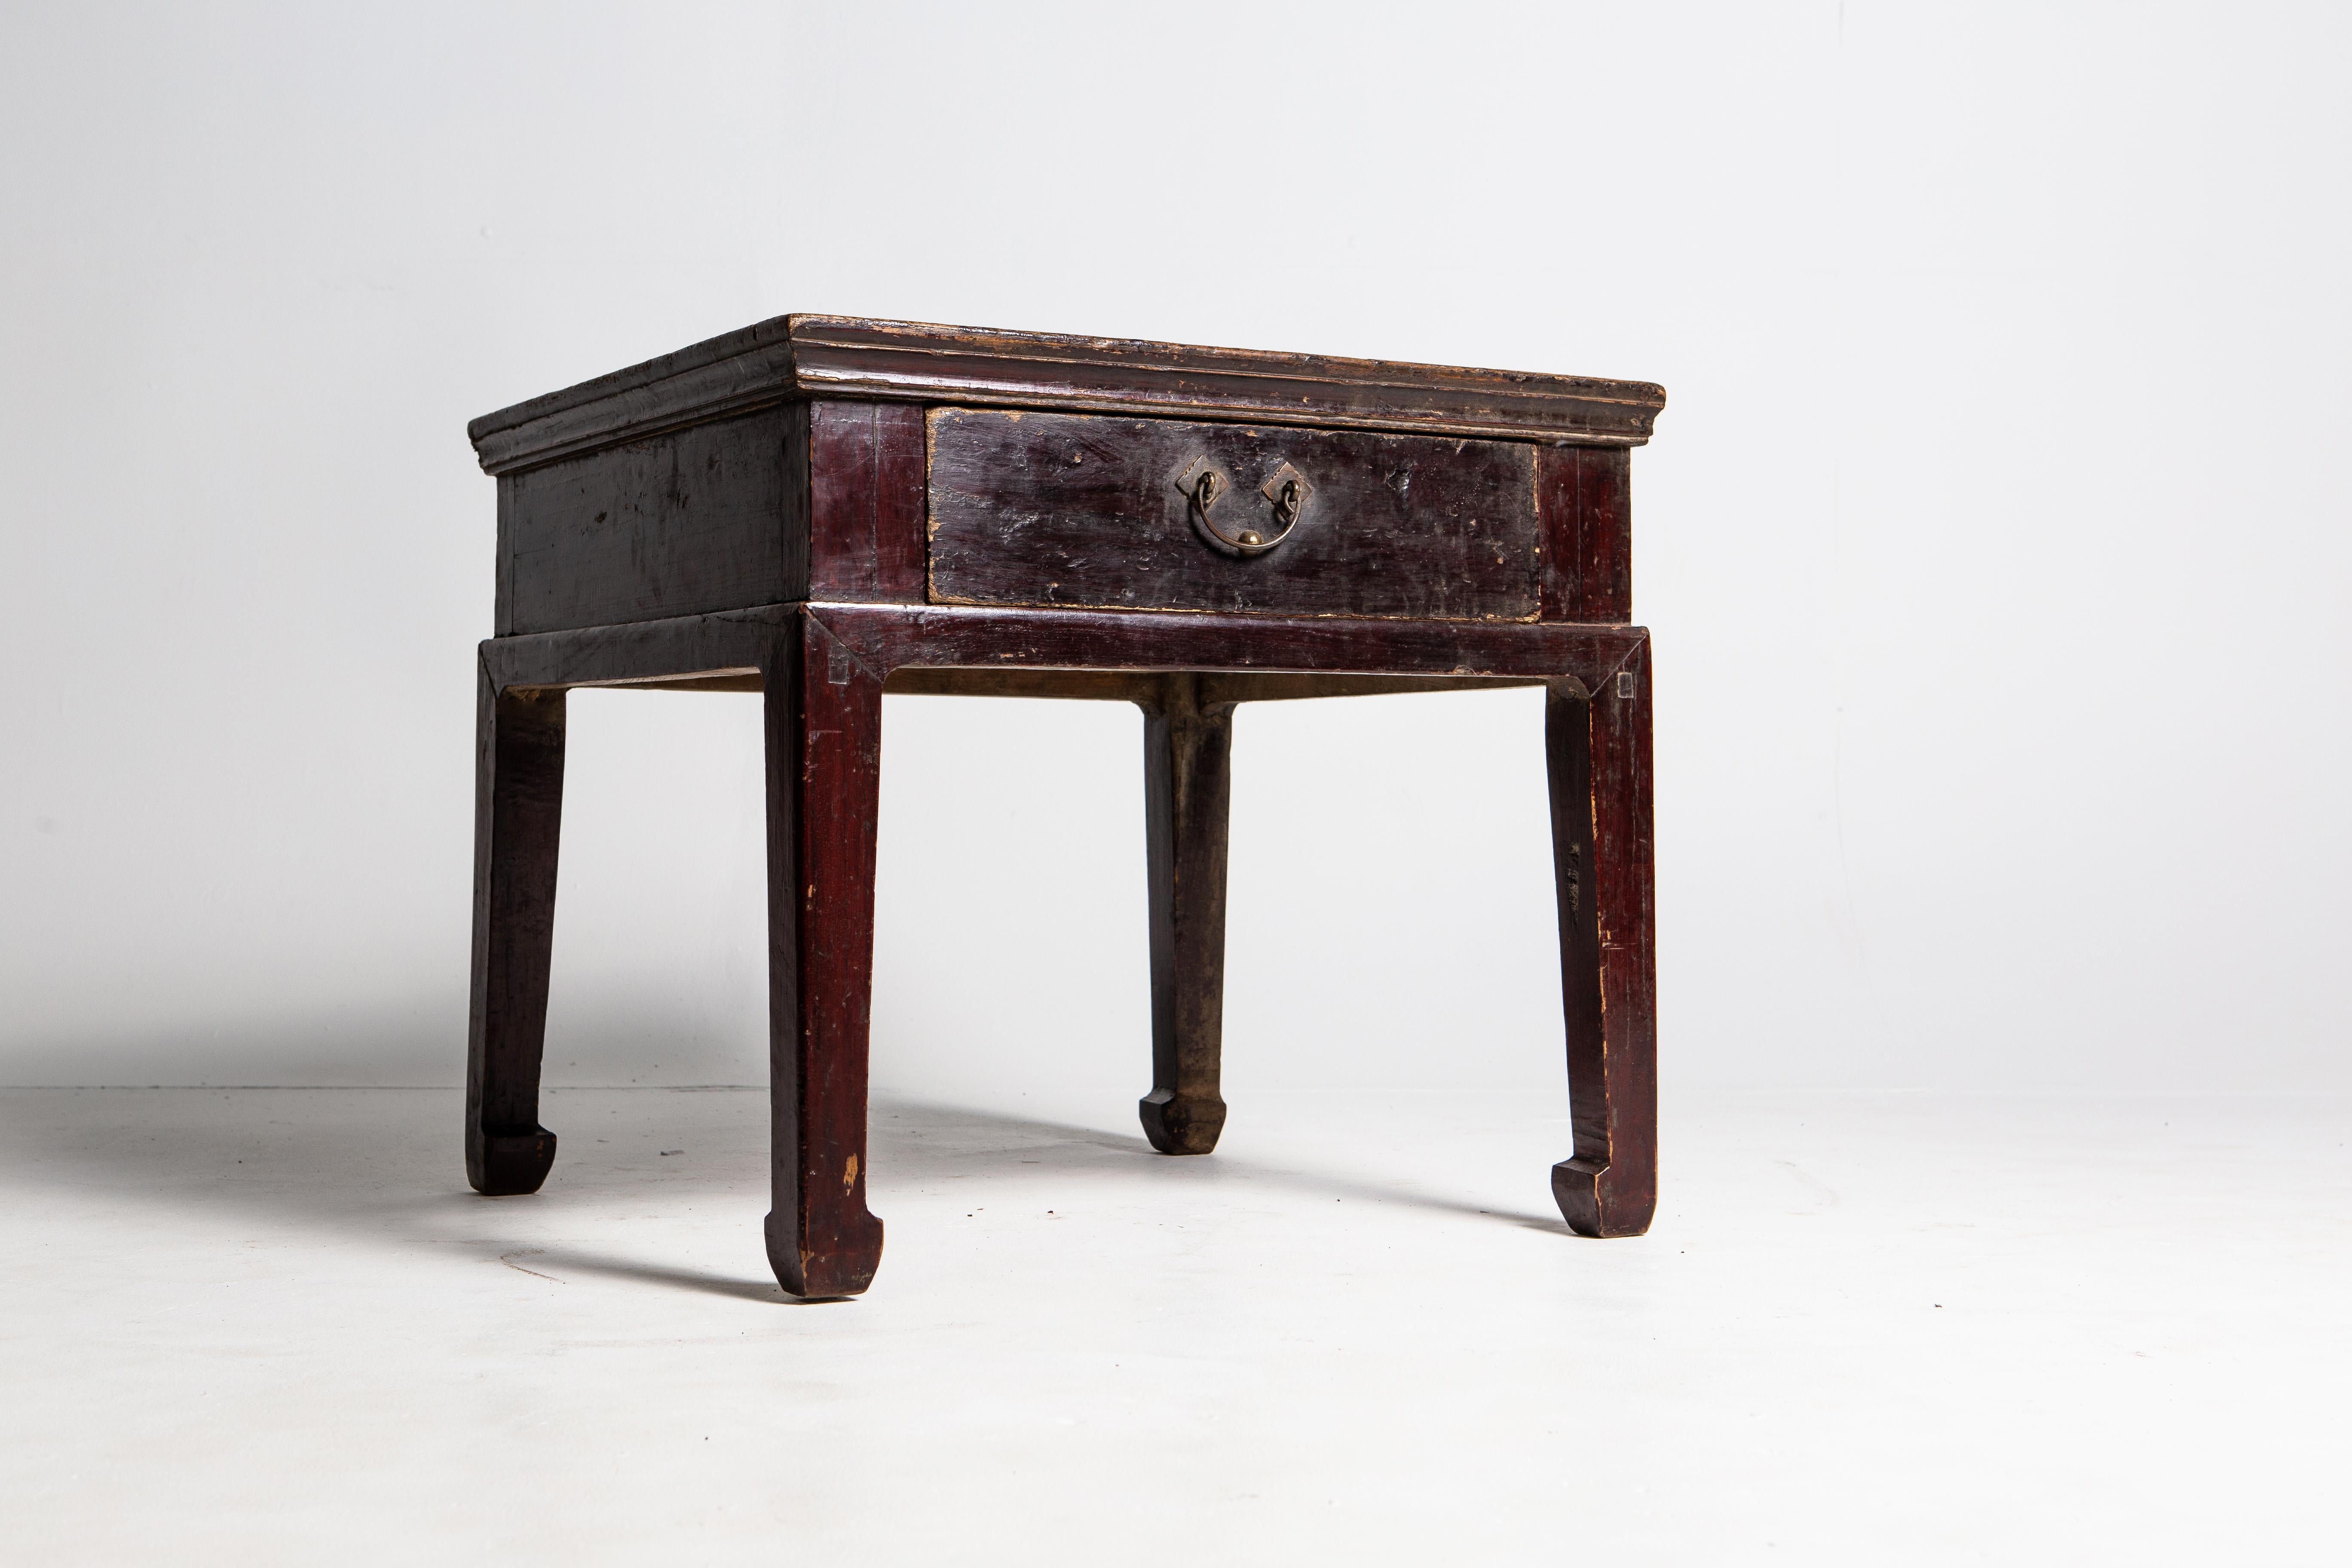 Elm Late Qing Dynasty Small Square Table with Drawer